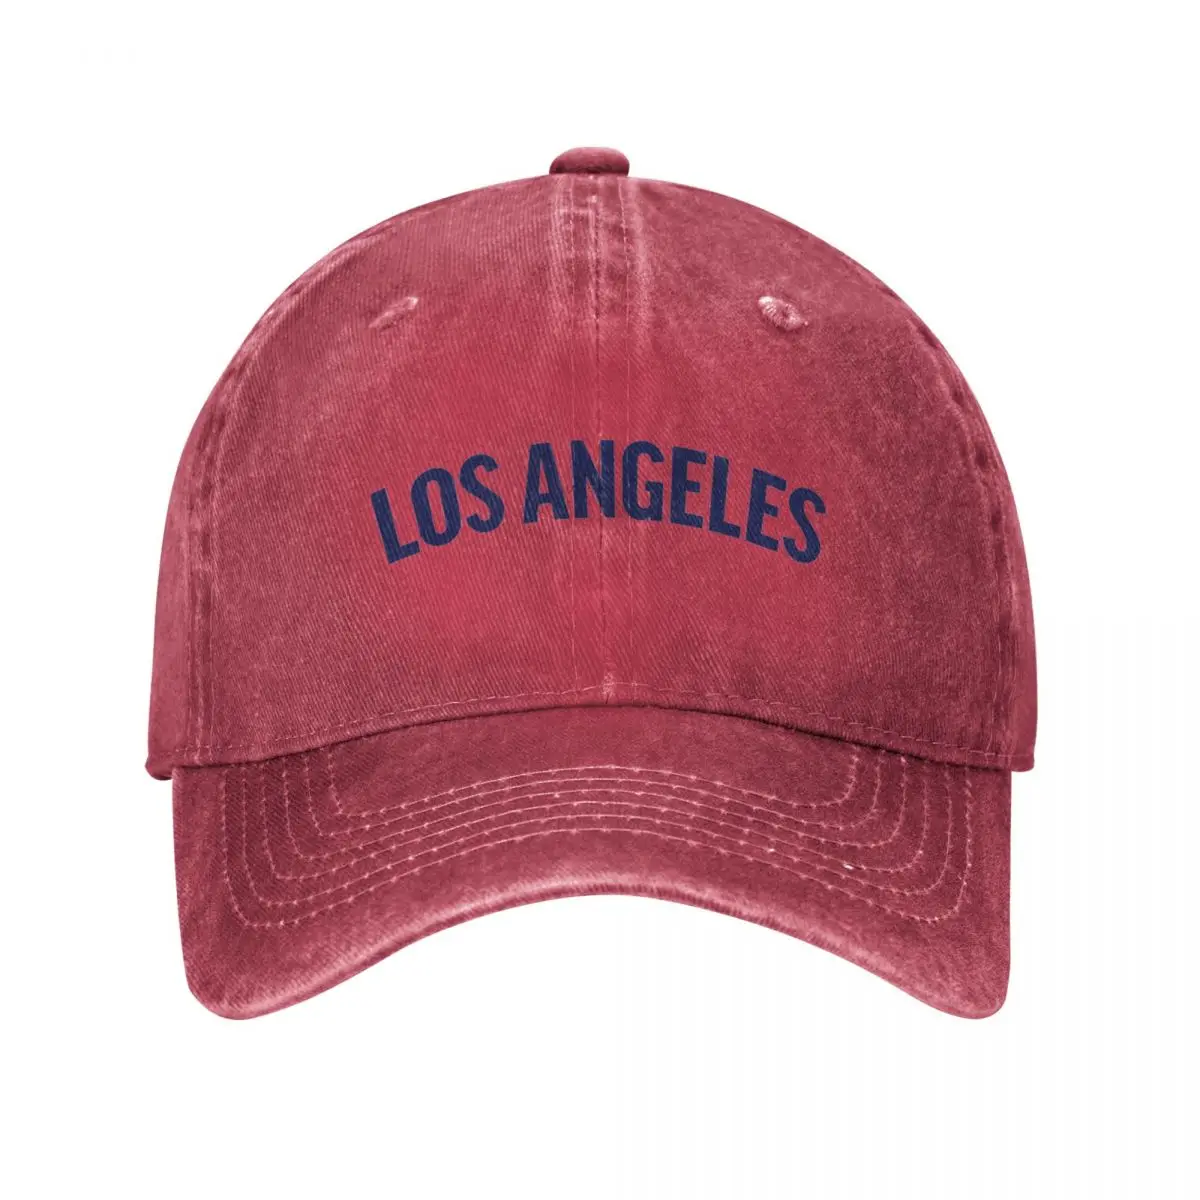 

Los Angeles City Baseball Caps Vintage Distressed Washed Snapback Hat Unisex Style Outdoor Running Golf Adjustable Hats Cap